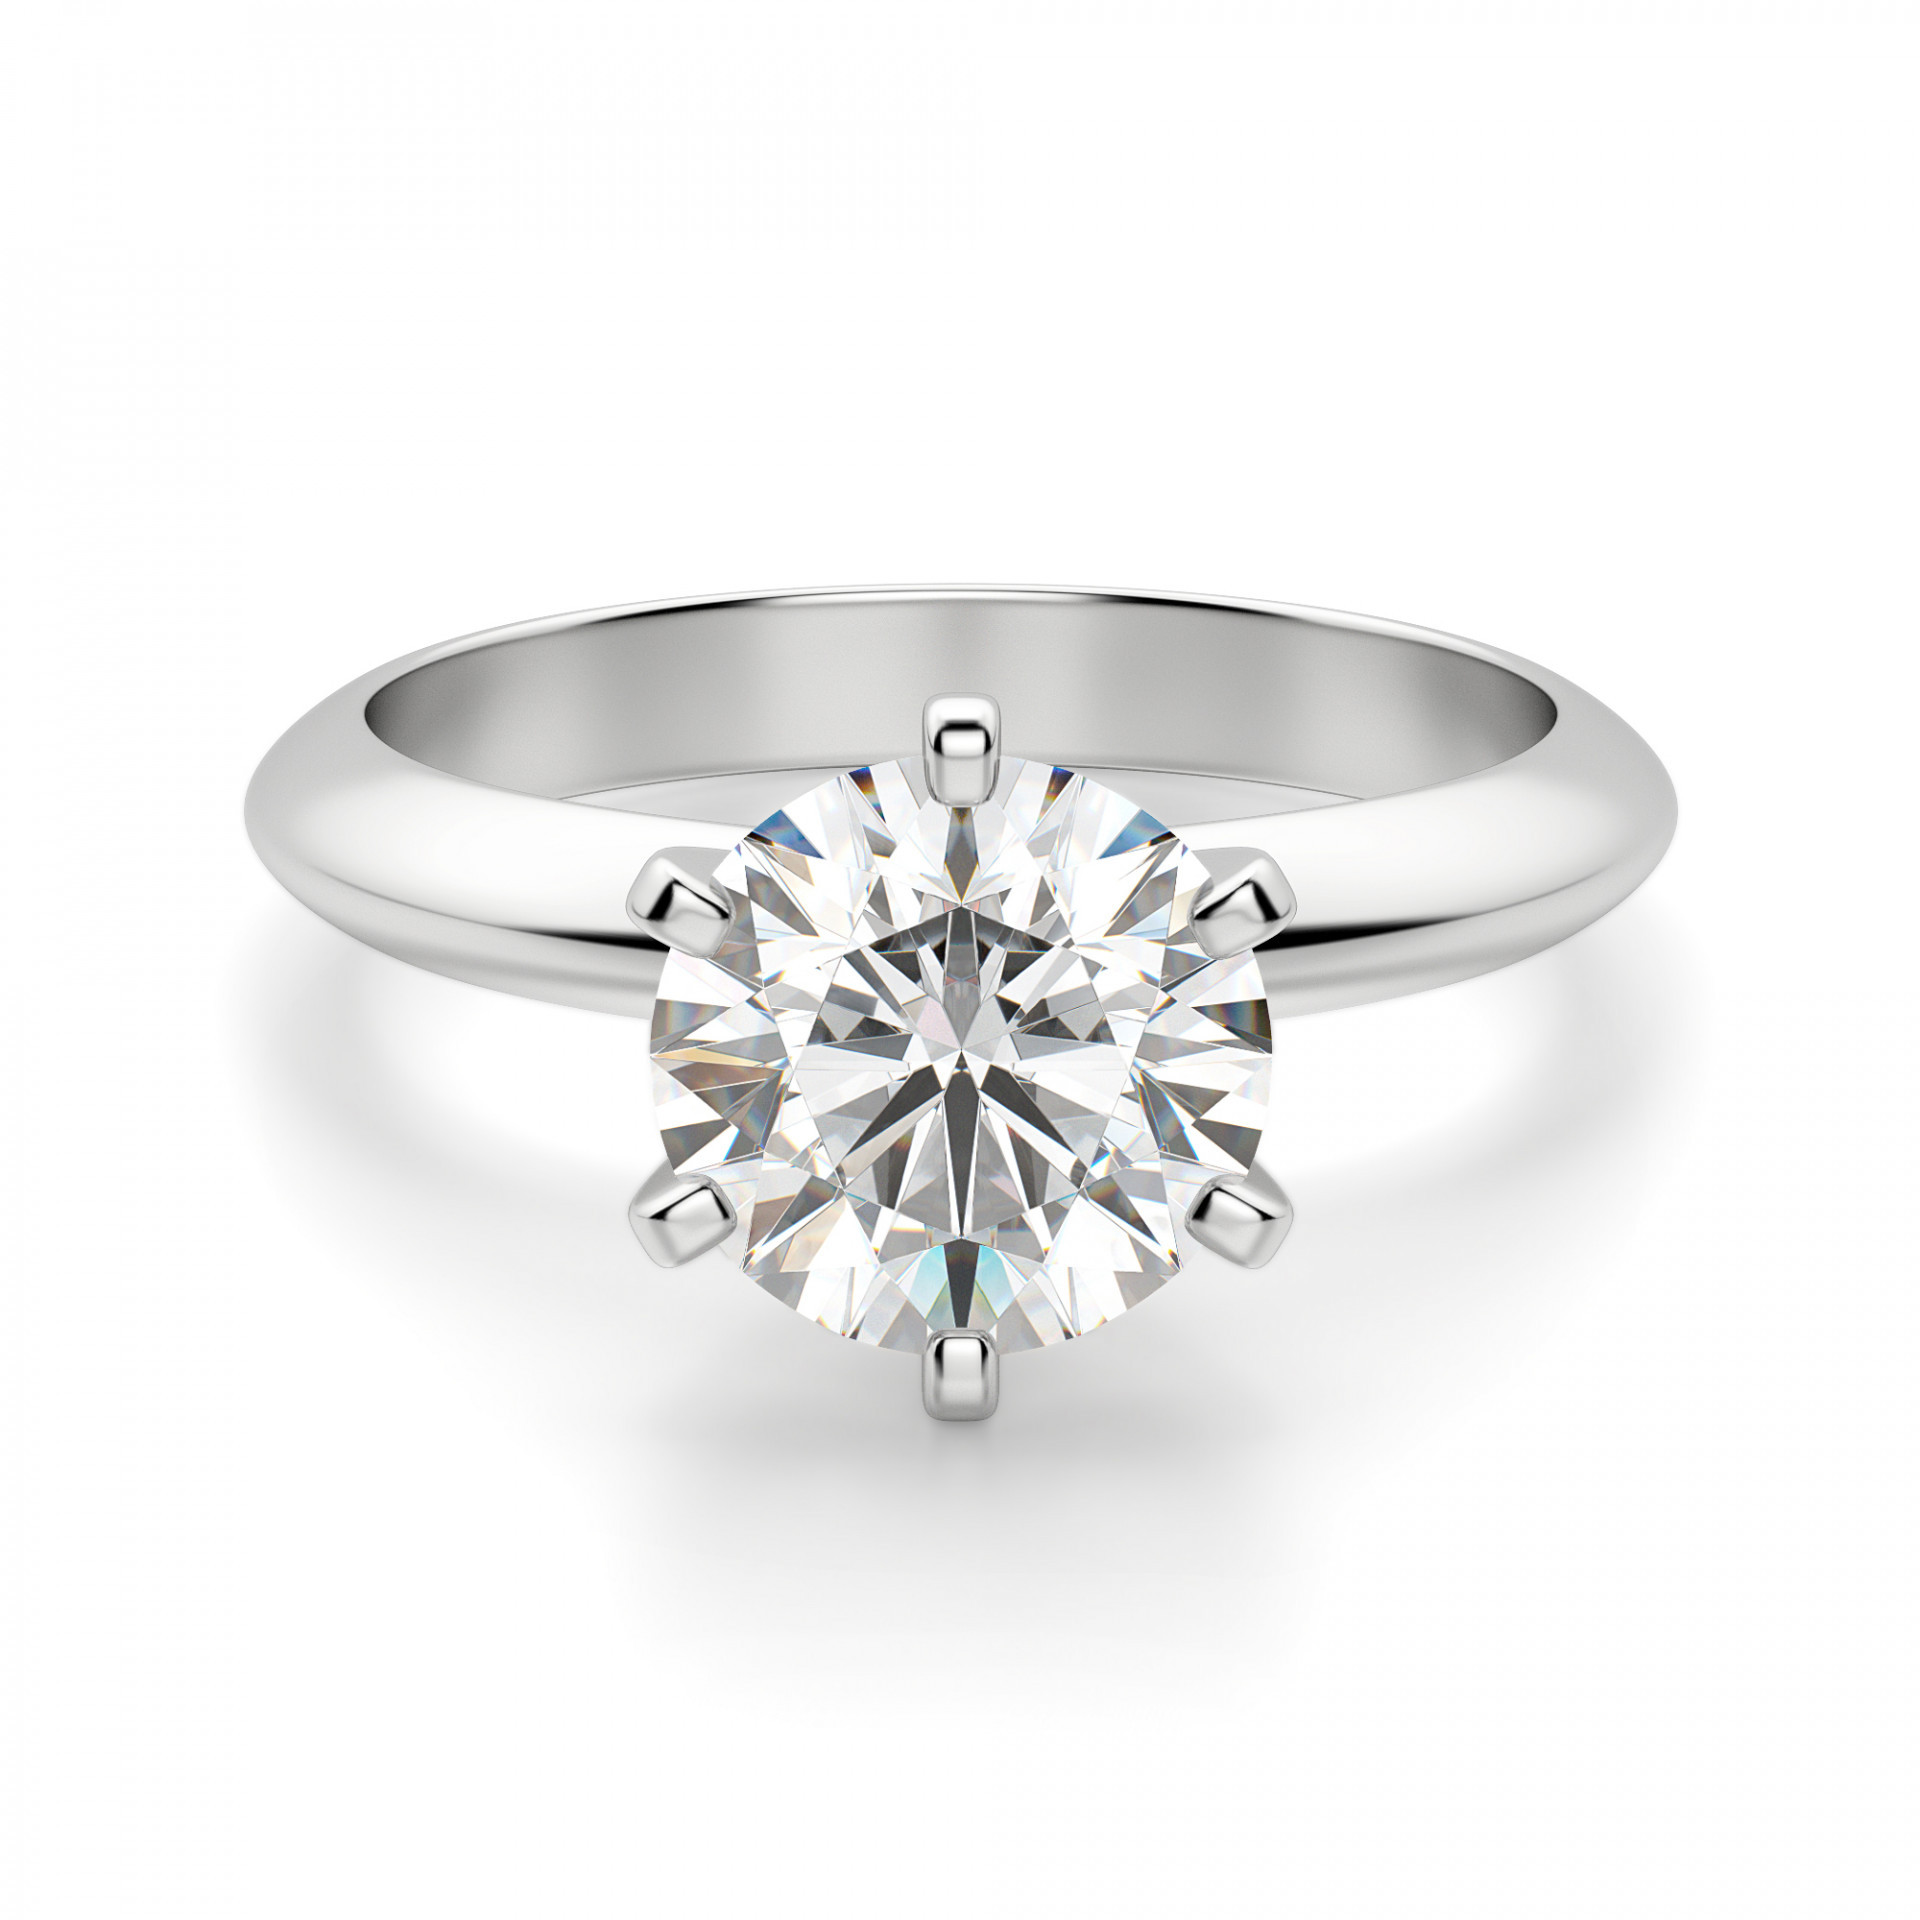 Tiffany Diamond Rings
 Engagement Rings Solitaire